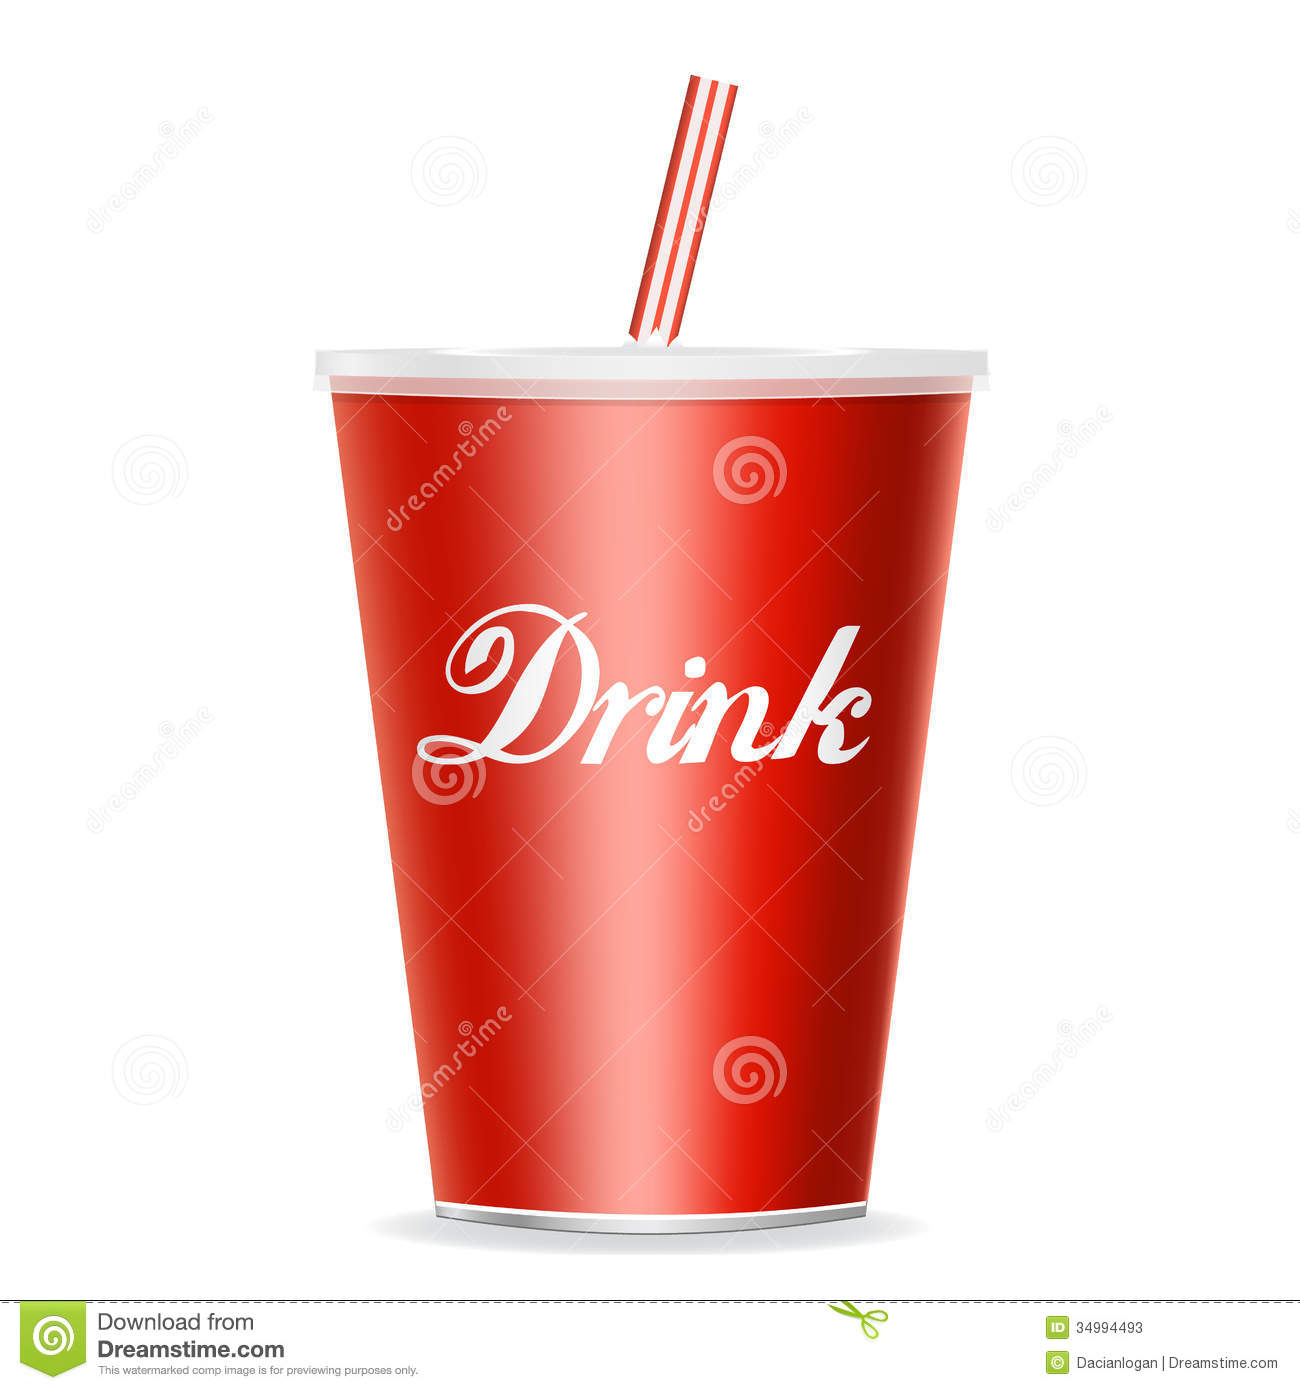 Drink Cup With Straw Stock Photos   Image  34994493